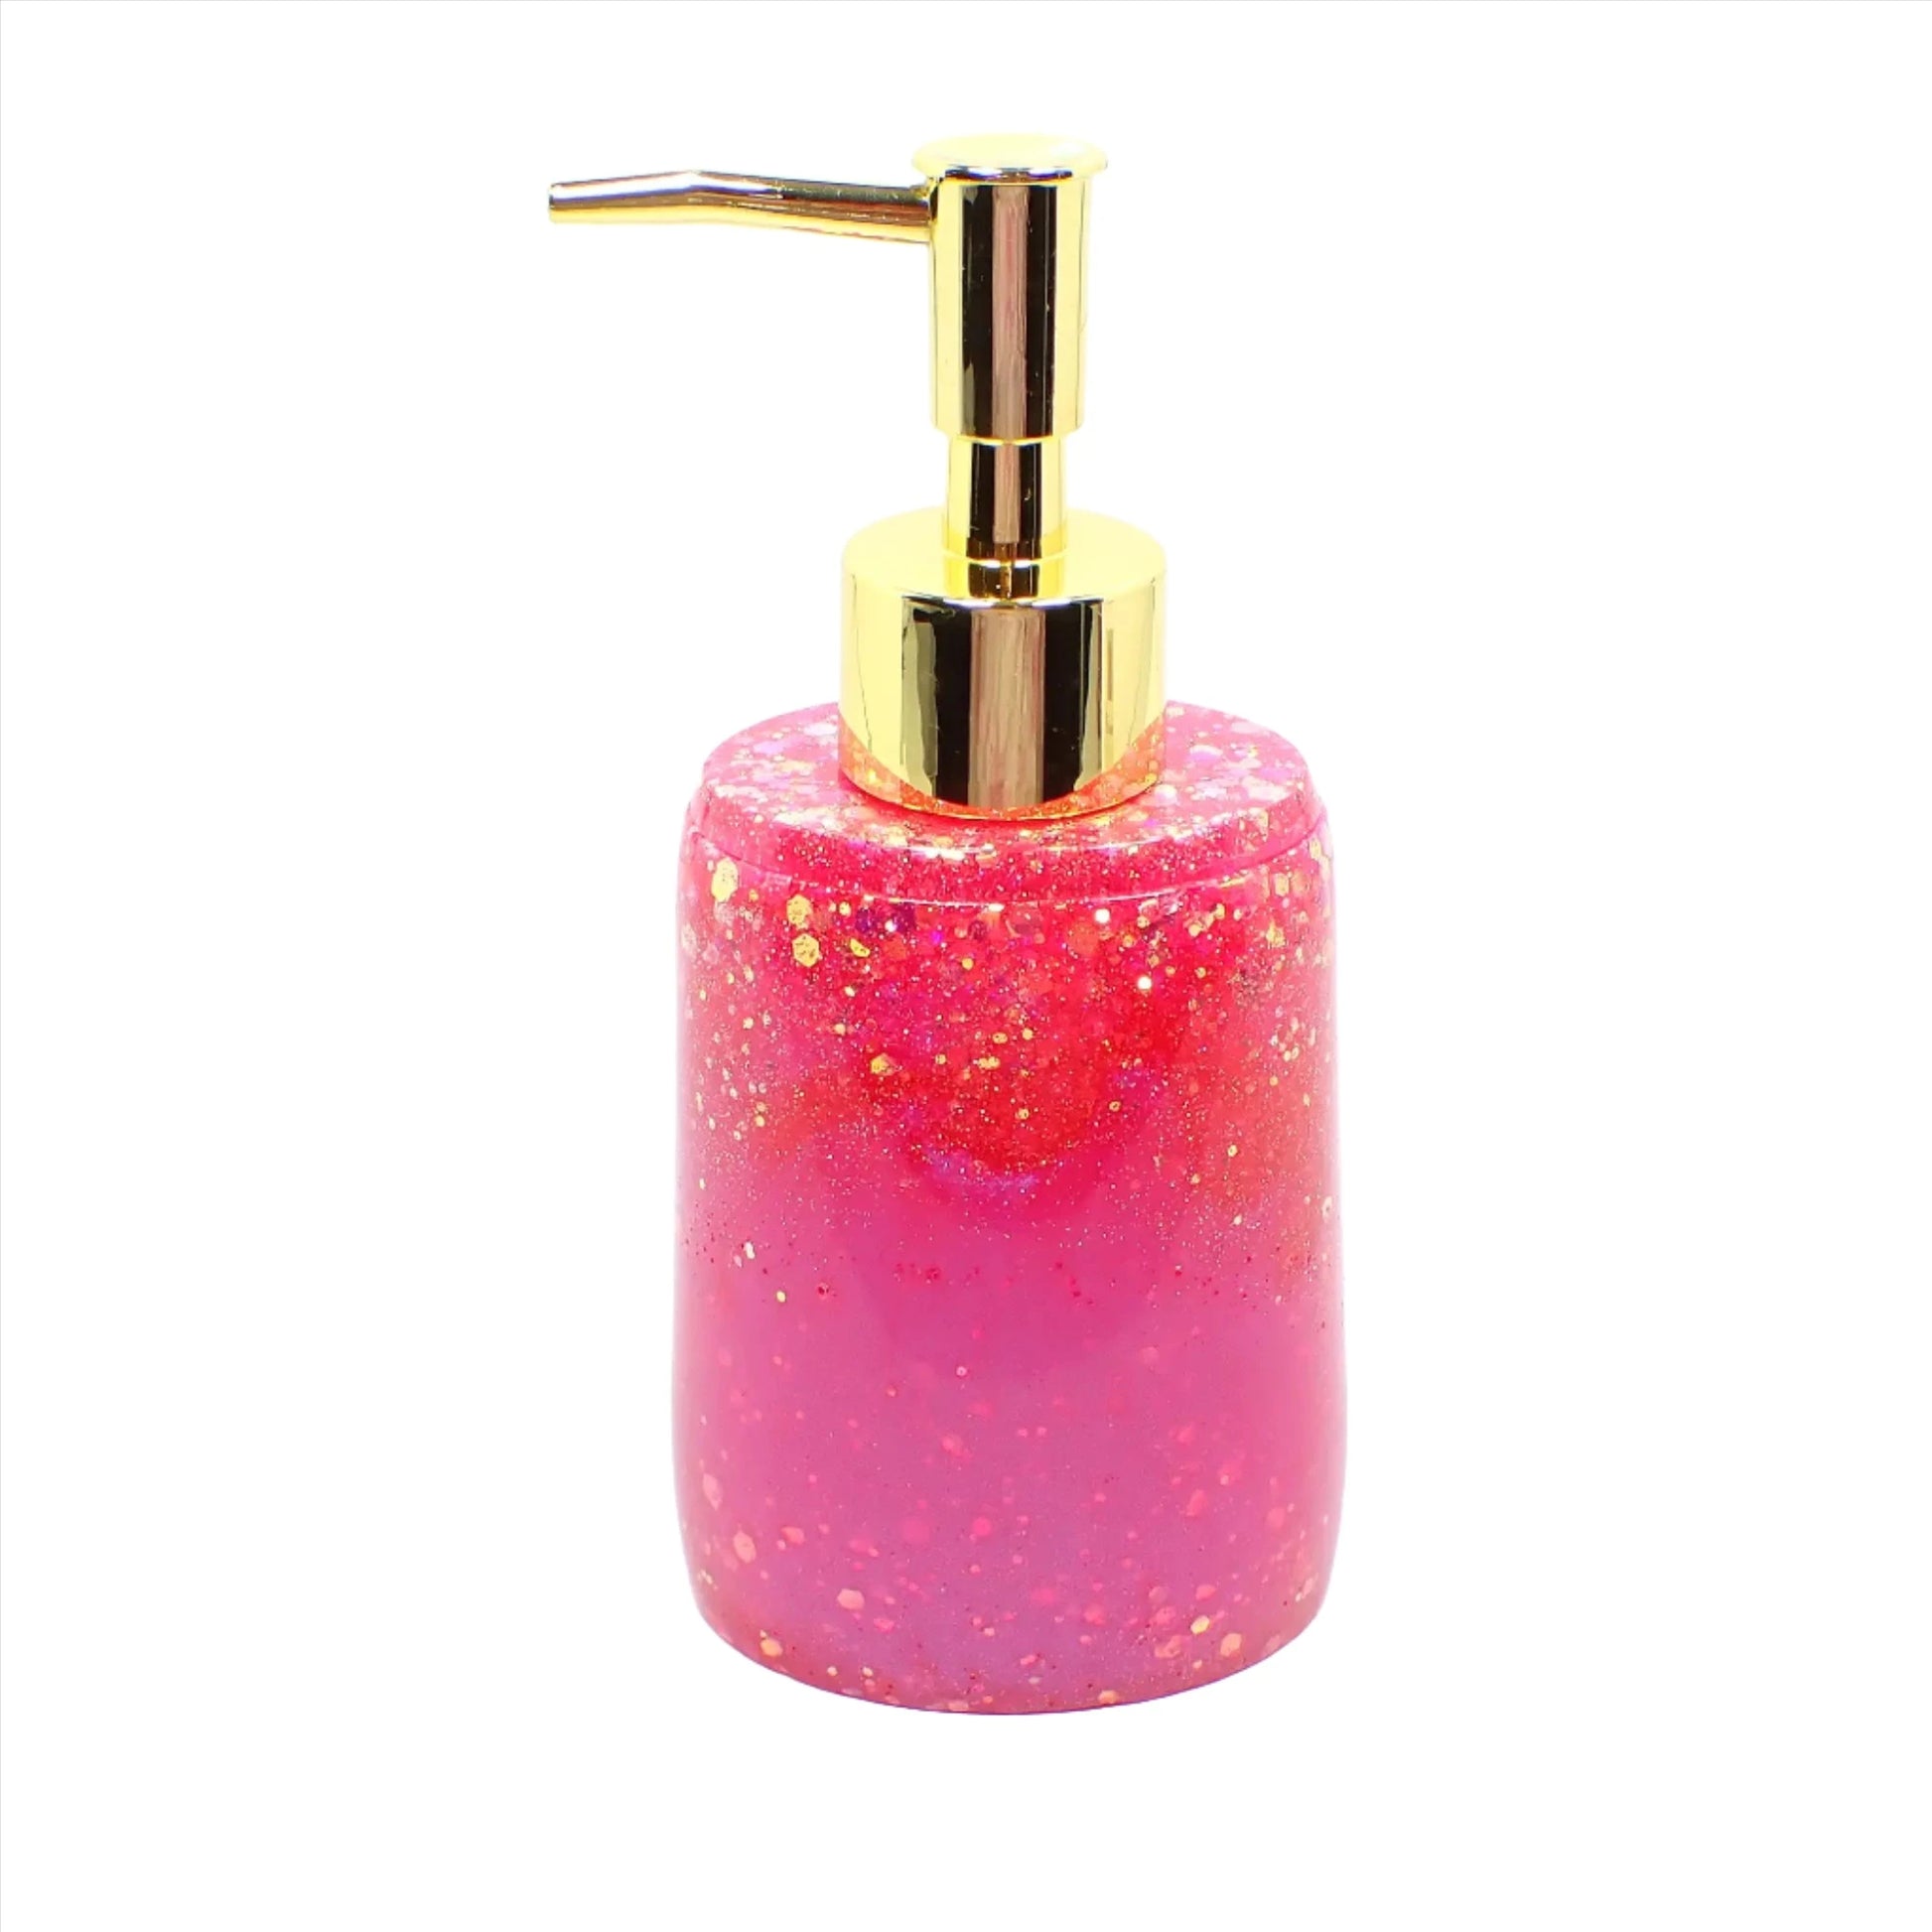 Side view of the handmade resin and glitter soap dispenser. It is oval shaped with a gold tone metallic plastic pump style top. The resin is a bright pearly iridescent pink color with chunky iridescent glitter.